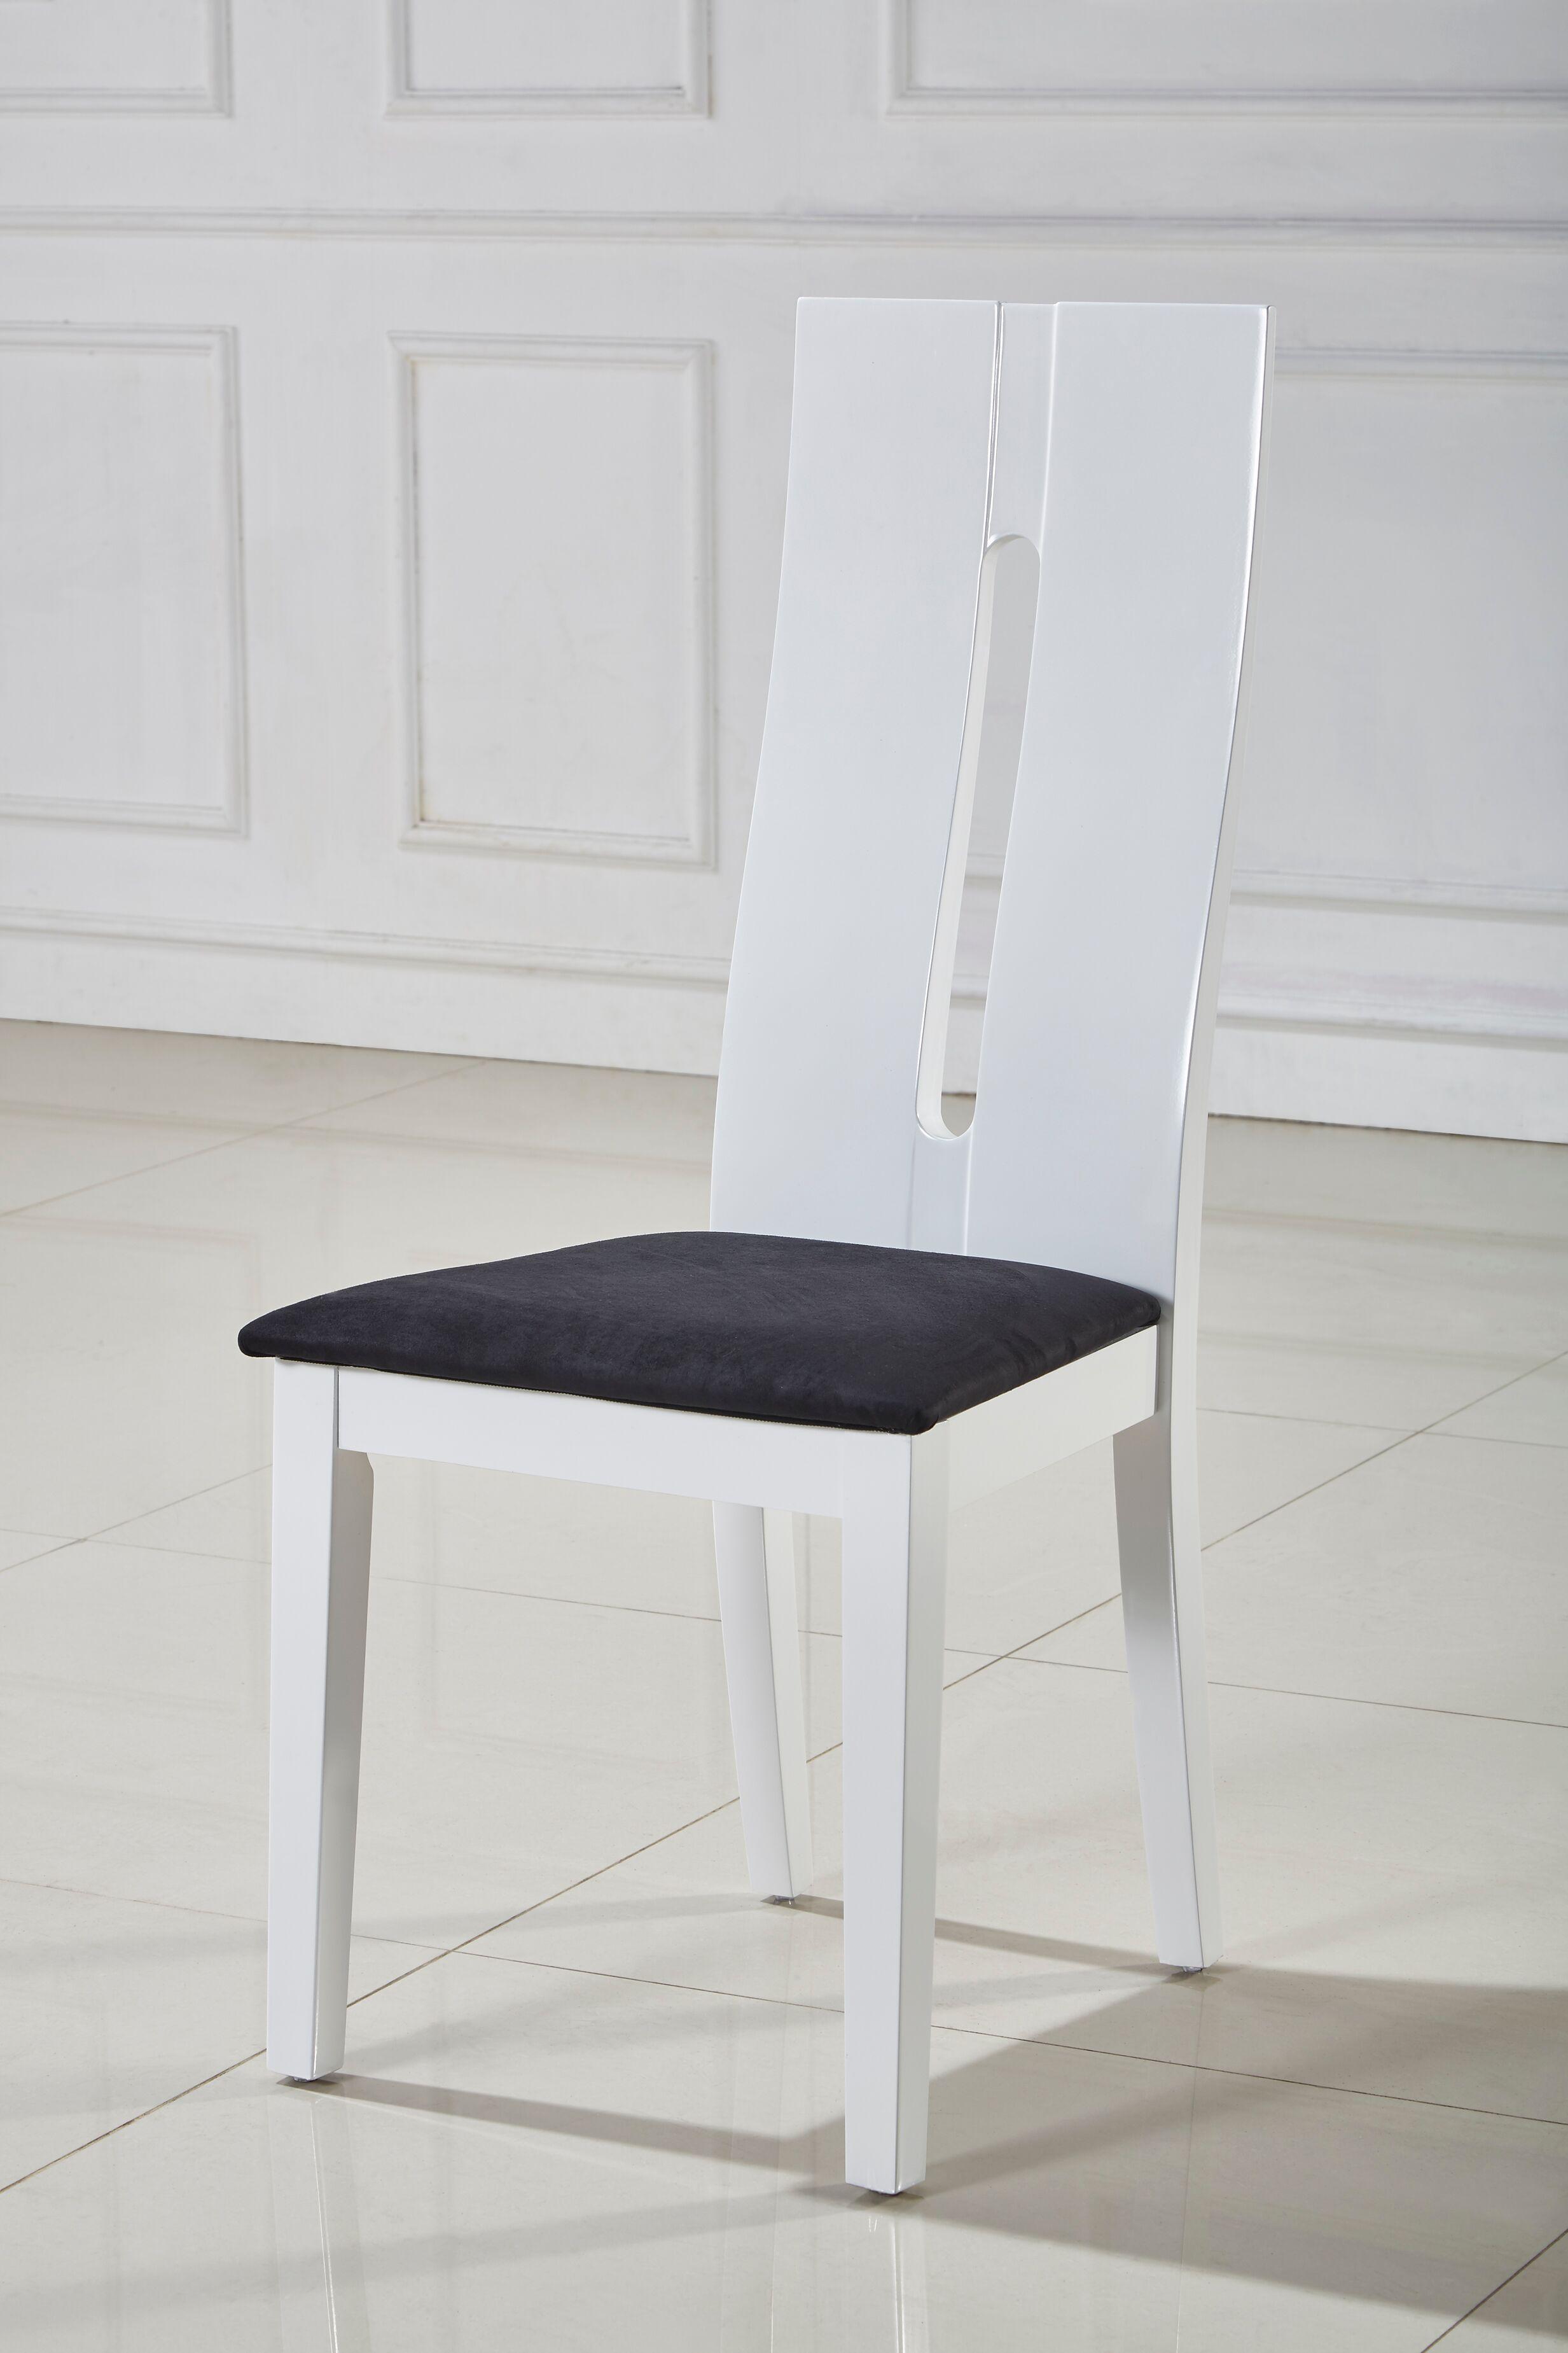 At Home USA Laura Dining Side Chair